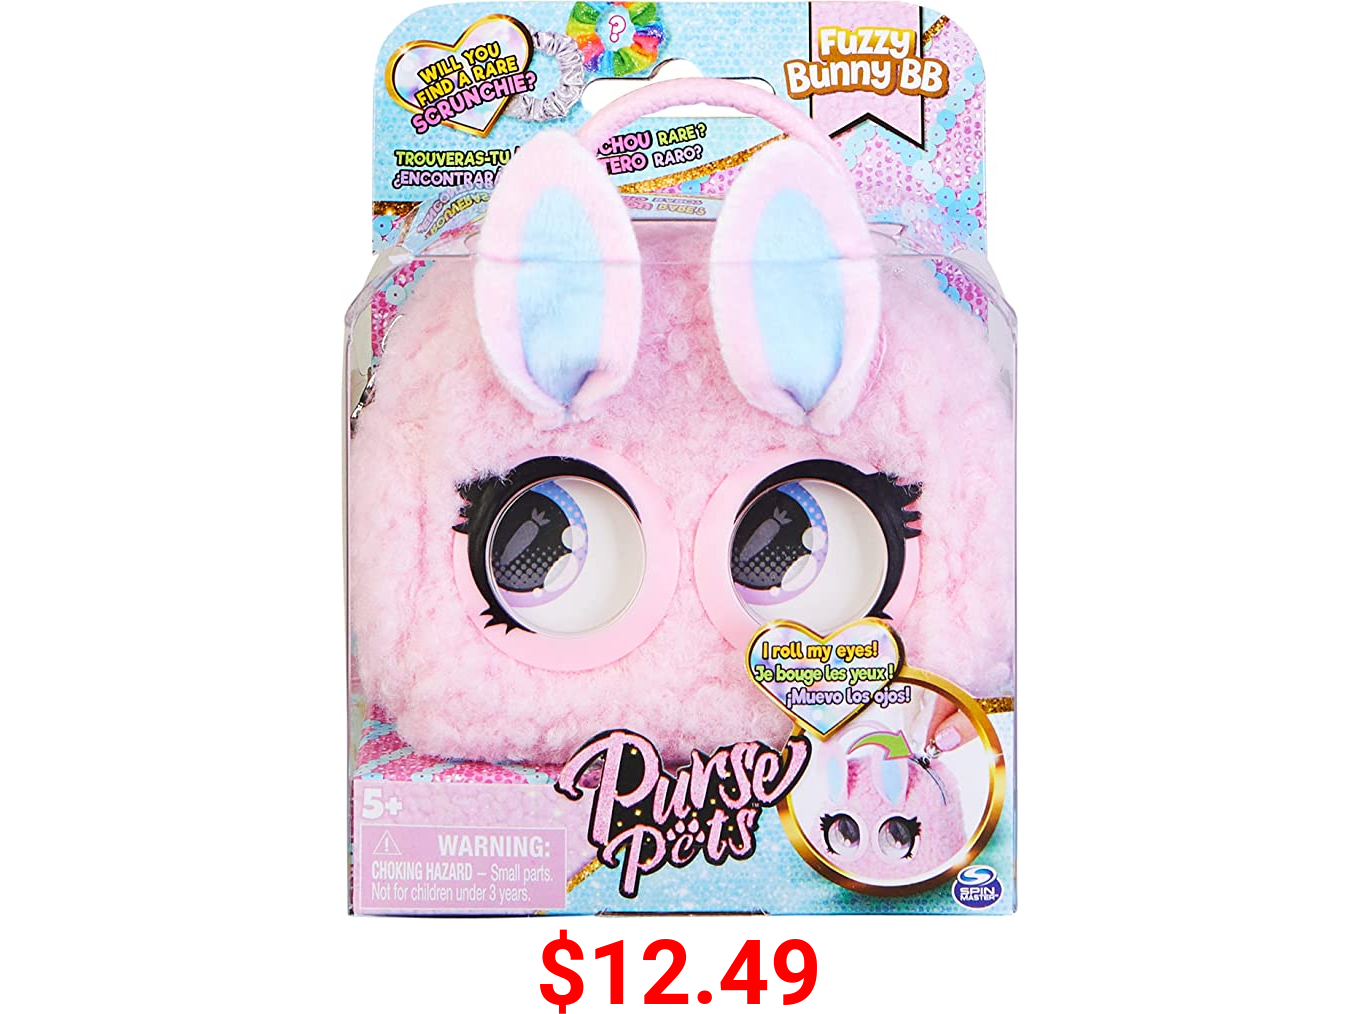 Purse Pets Micros, Fuzzy Bunny BB Stylish Small Purse with Eye Roll Feature, Kids Toys for Girls Aged 5 and up